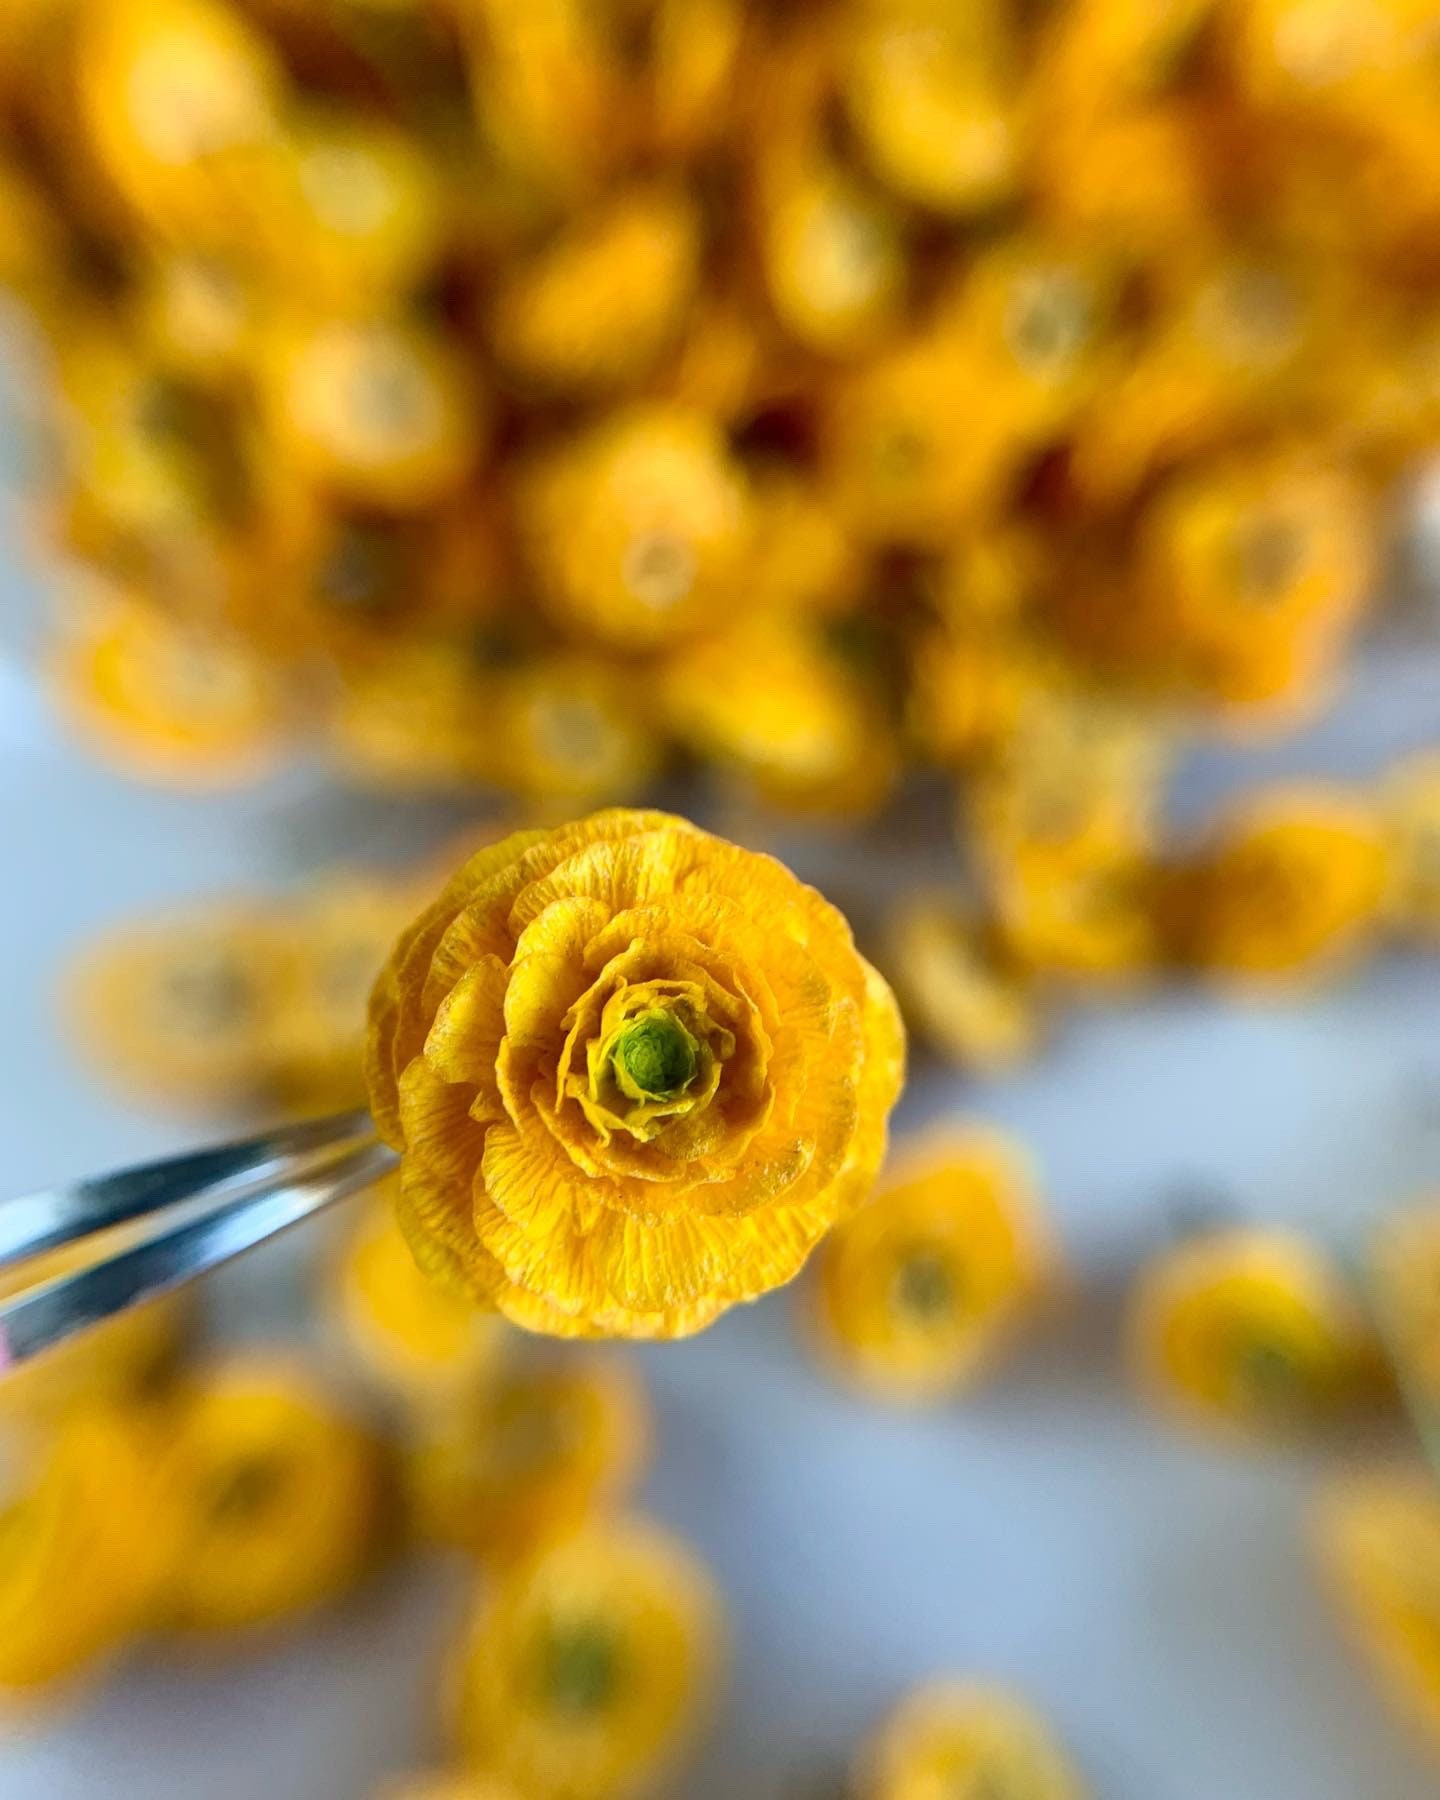 Dried Tansy & Ranunculus Bouquet